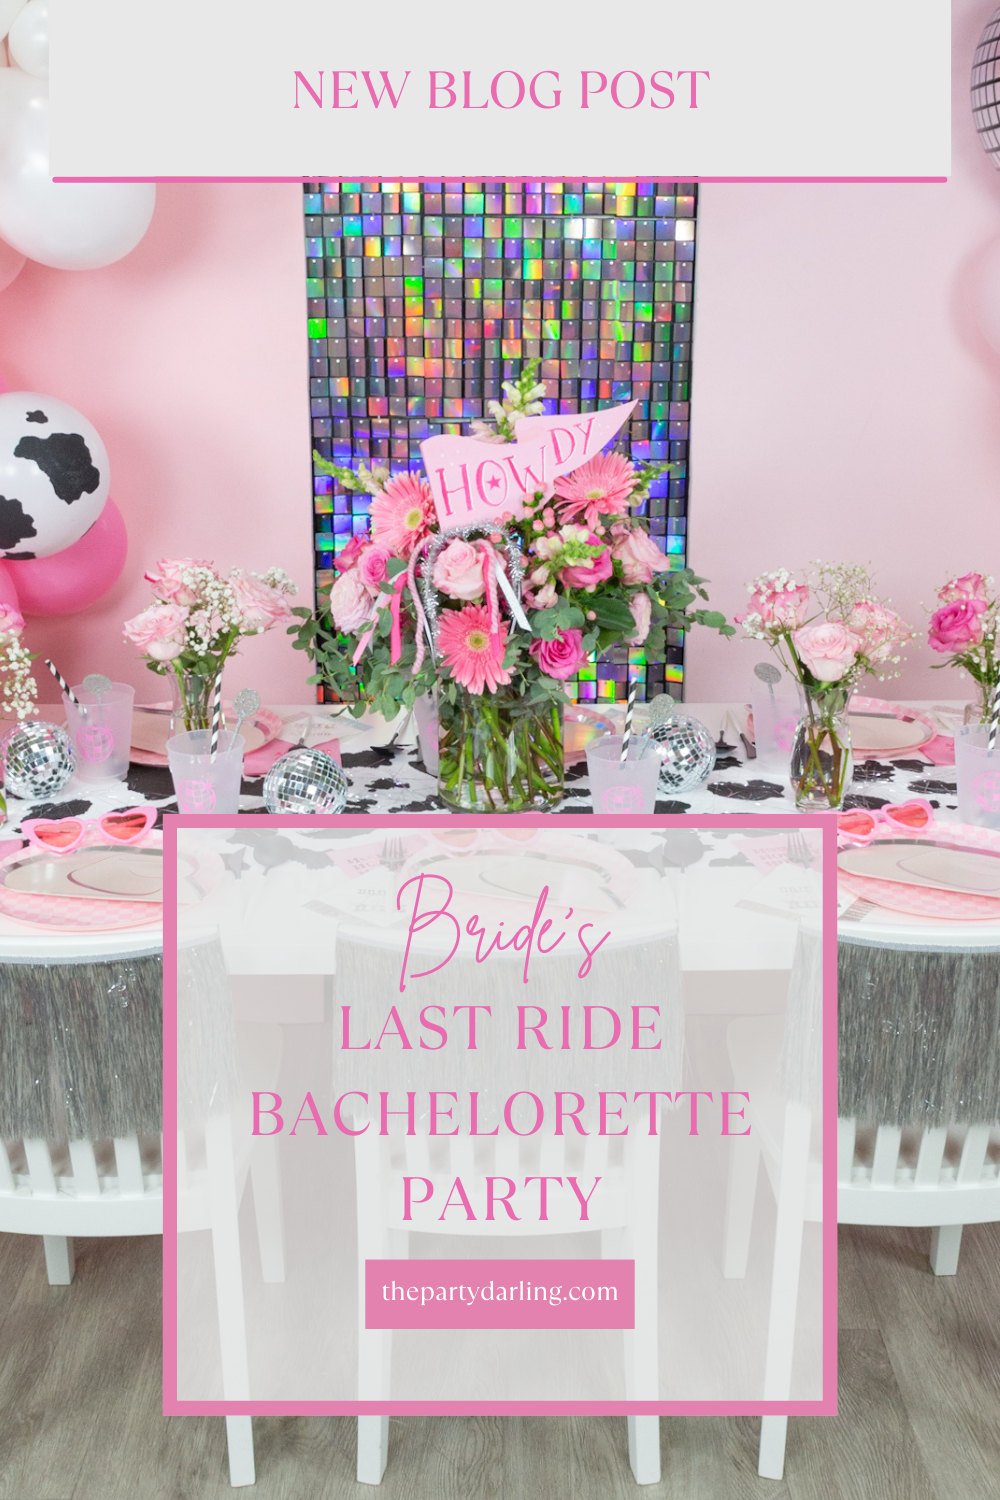 Bride's Last Ride Bachelorette Party | The Party Darling